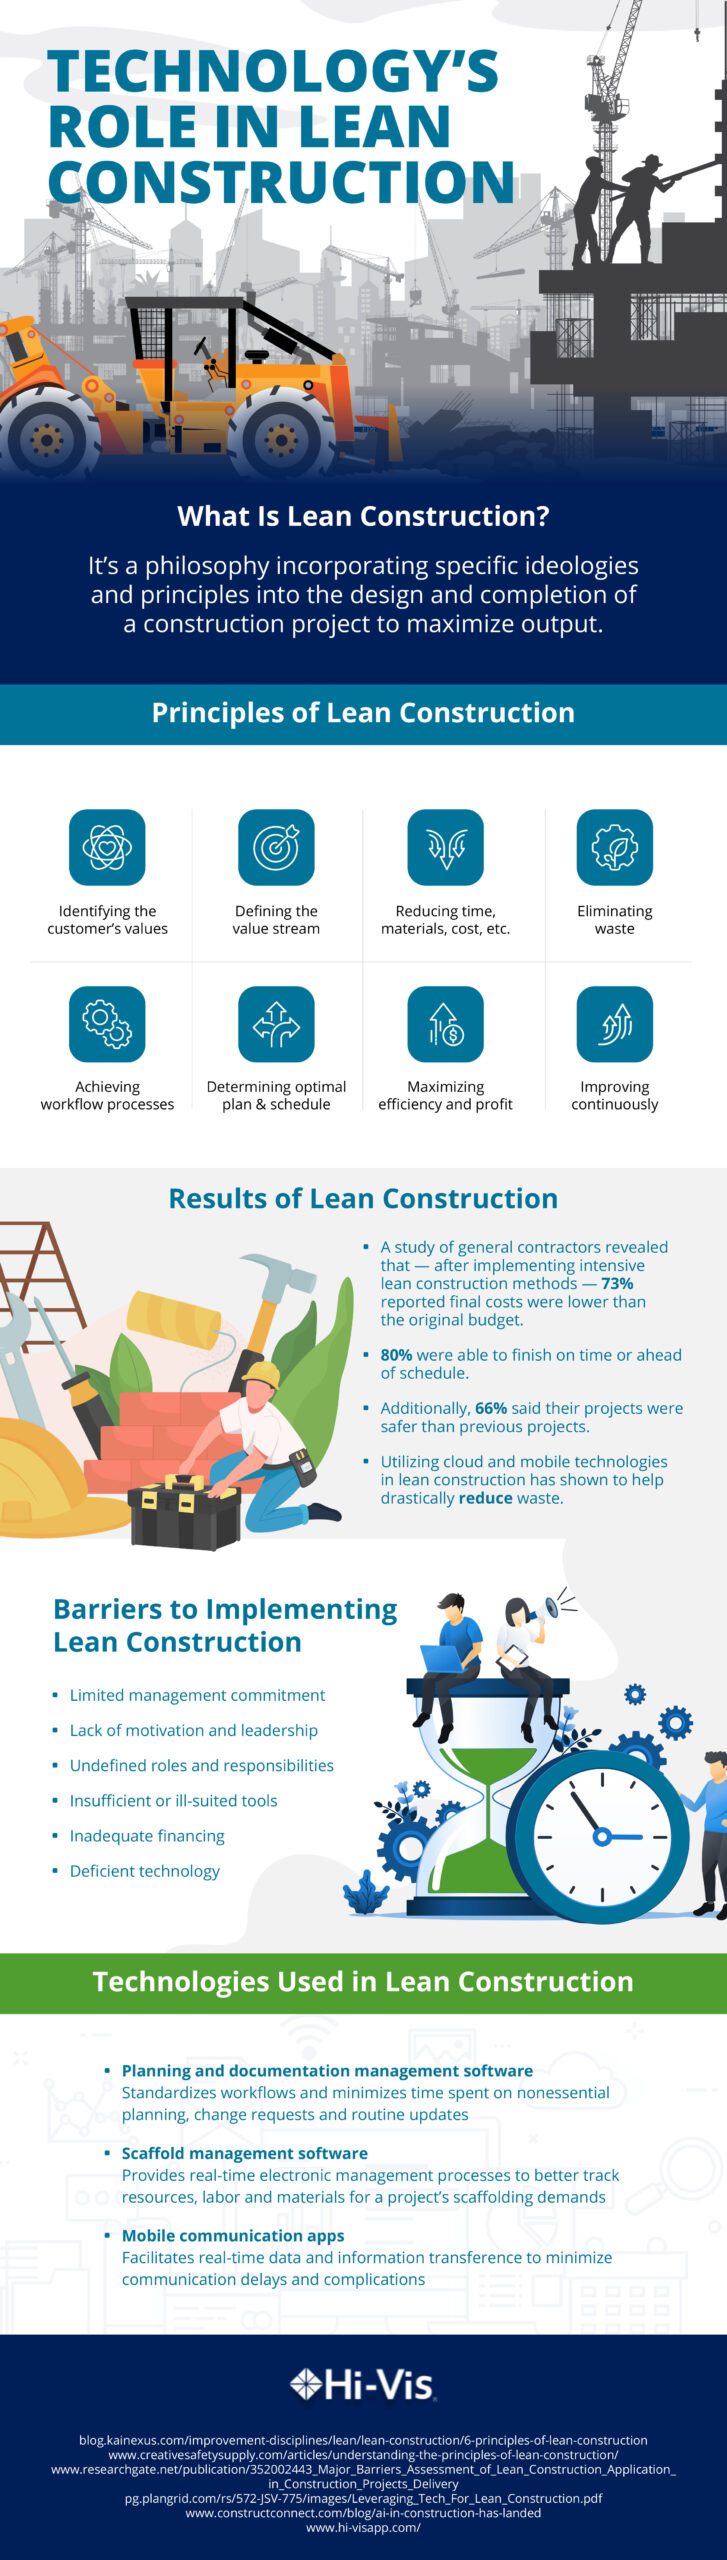 technology's role in lean construction infographic